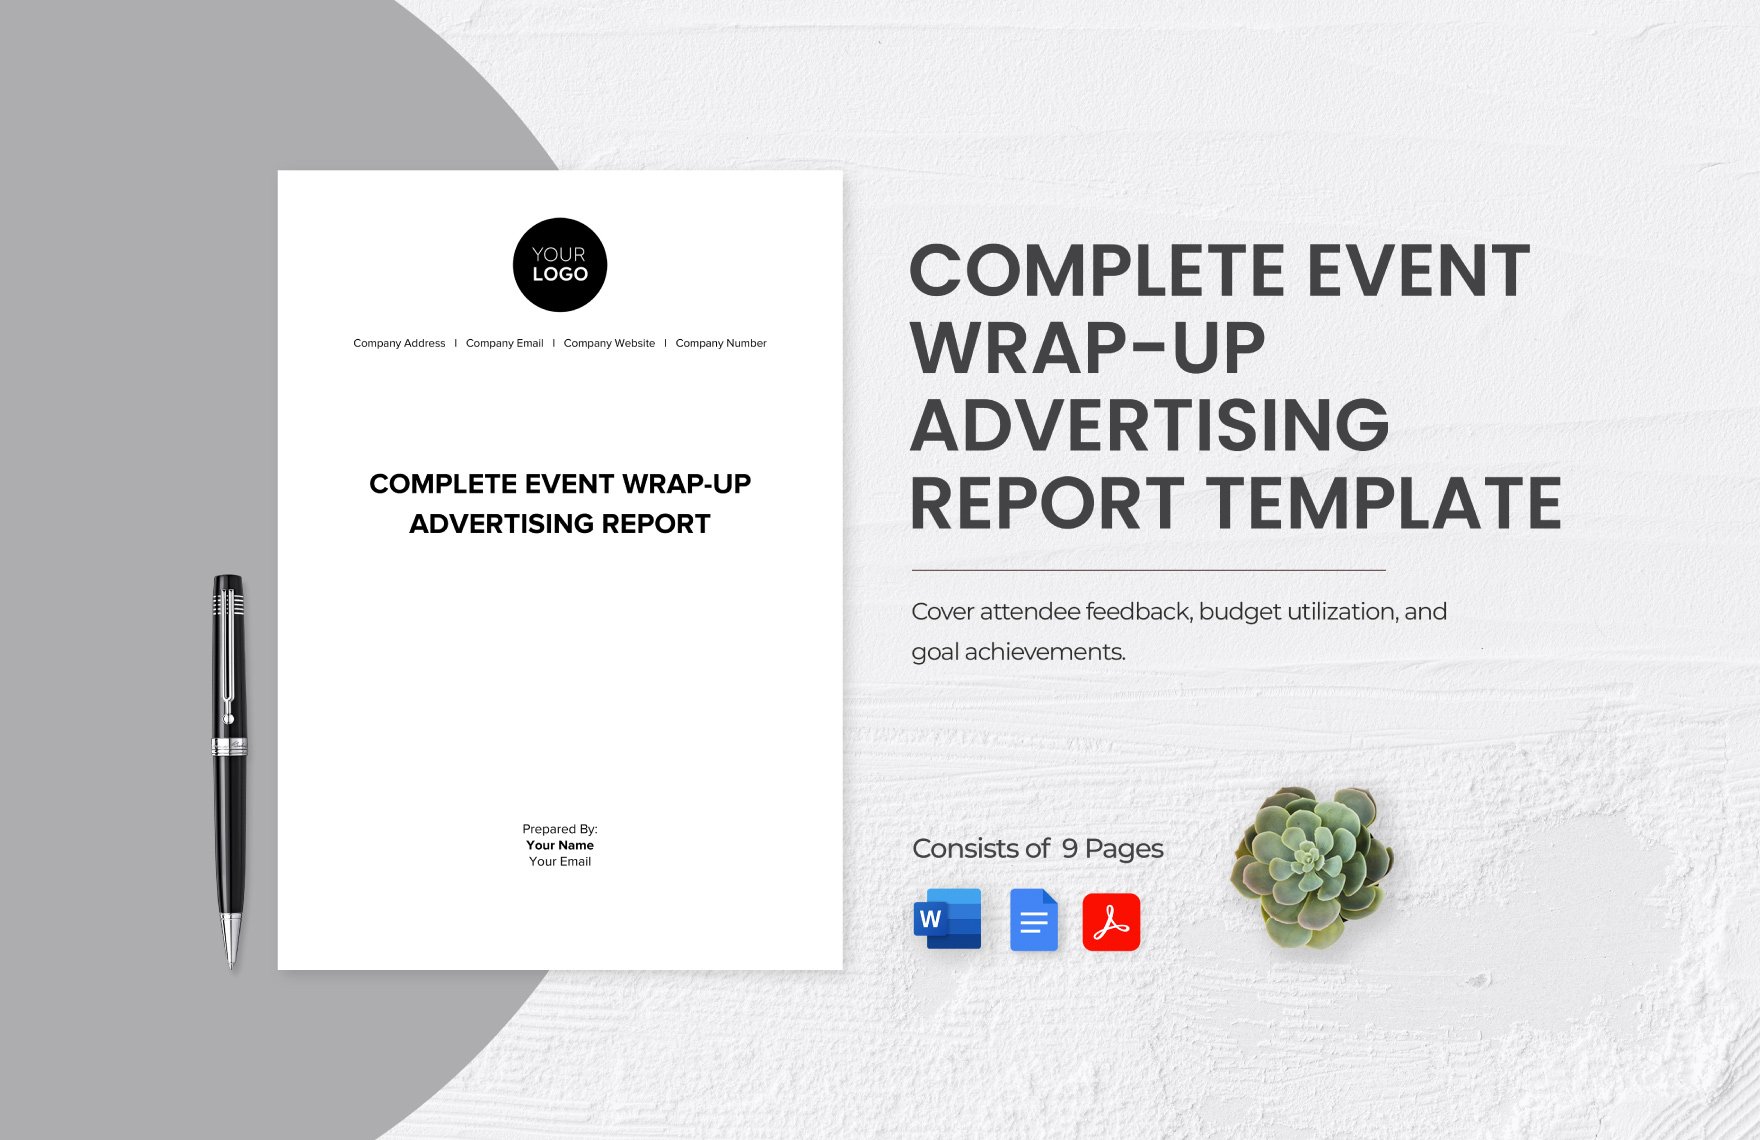 Free Complete Event Wrap-Up Advertising Report Template in Word, Google Docs, PDF